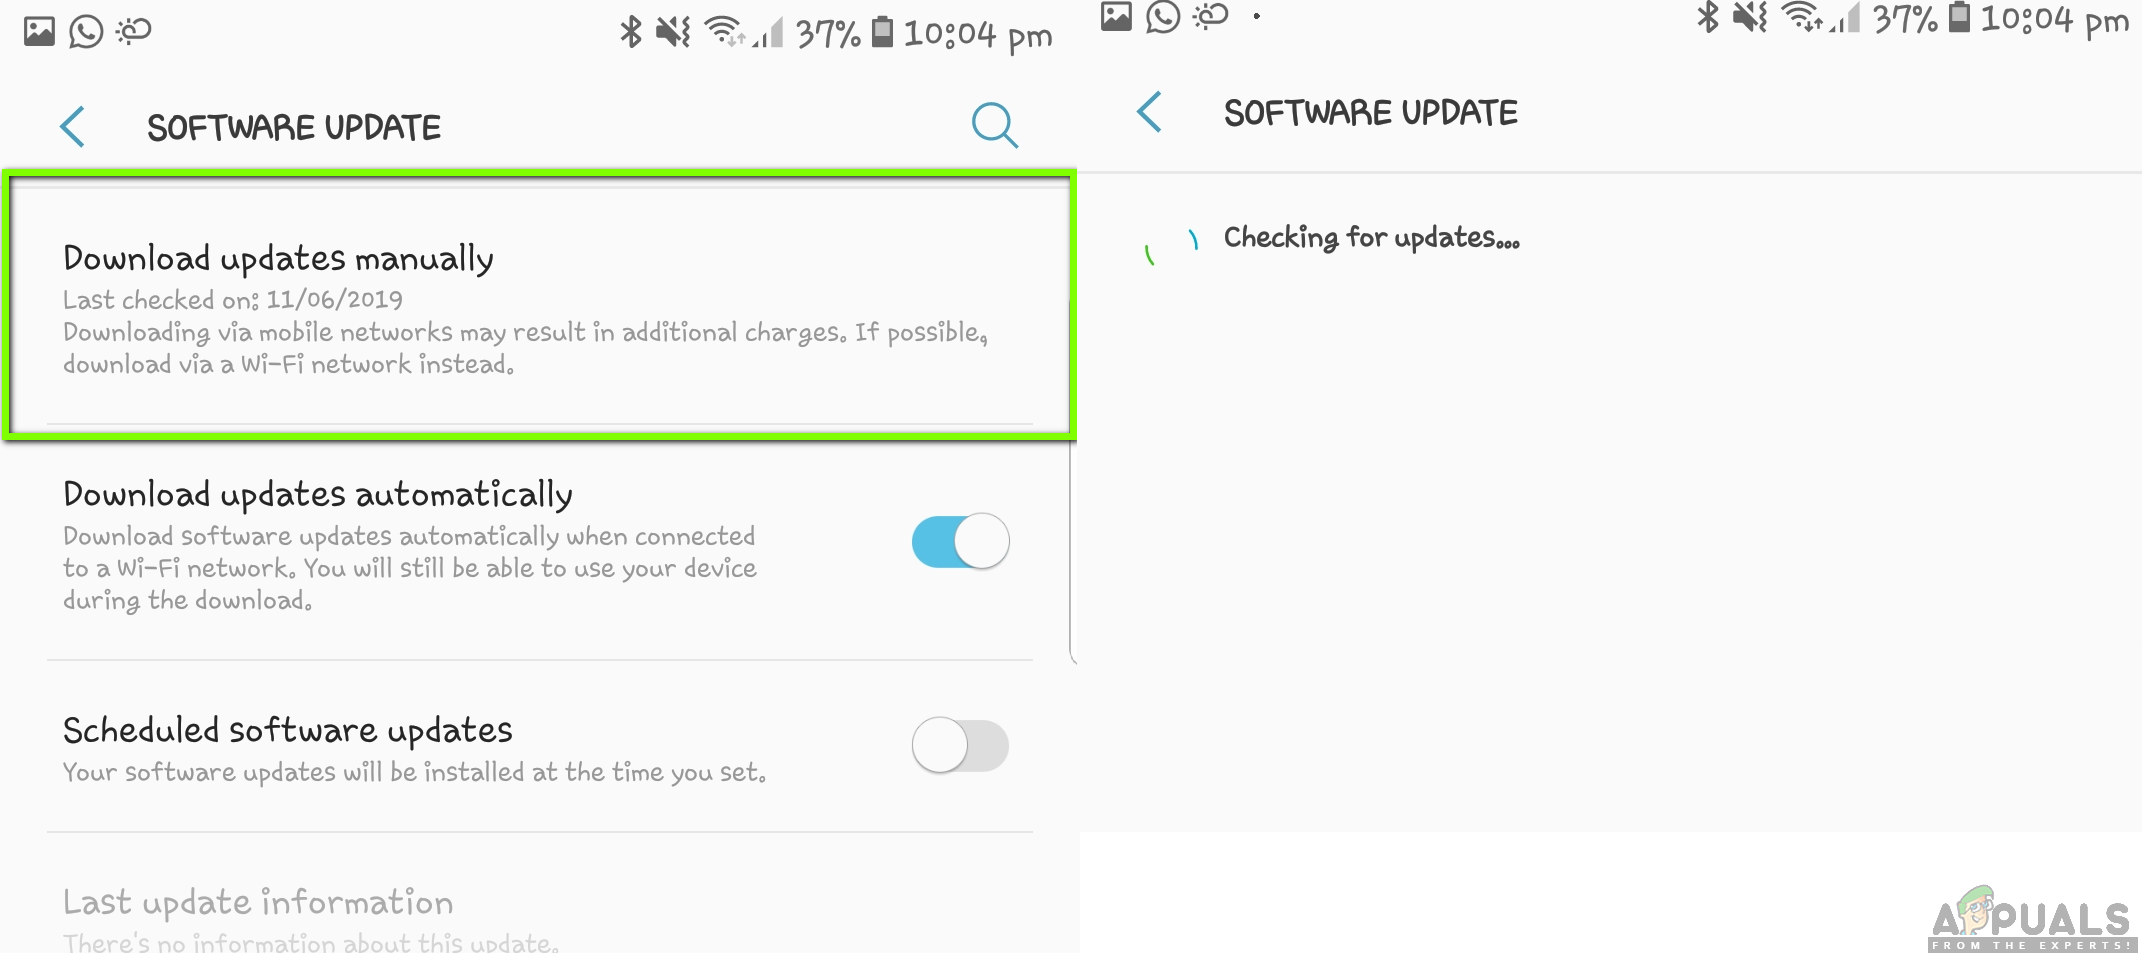 Downloading updates Manually - Android Settings